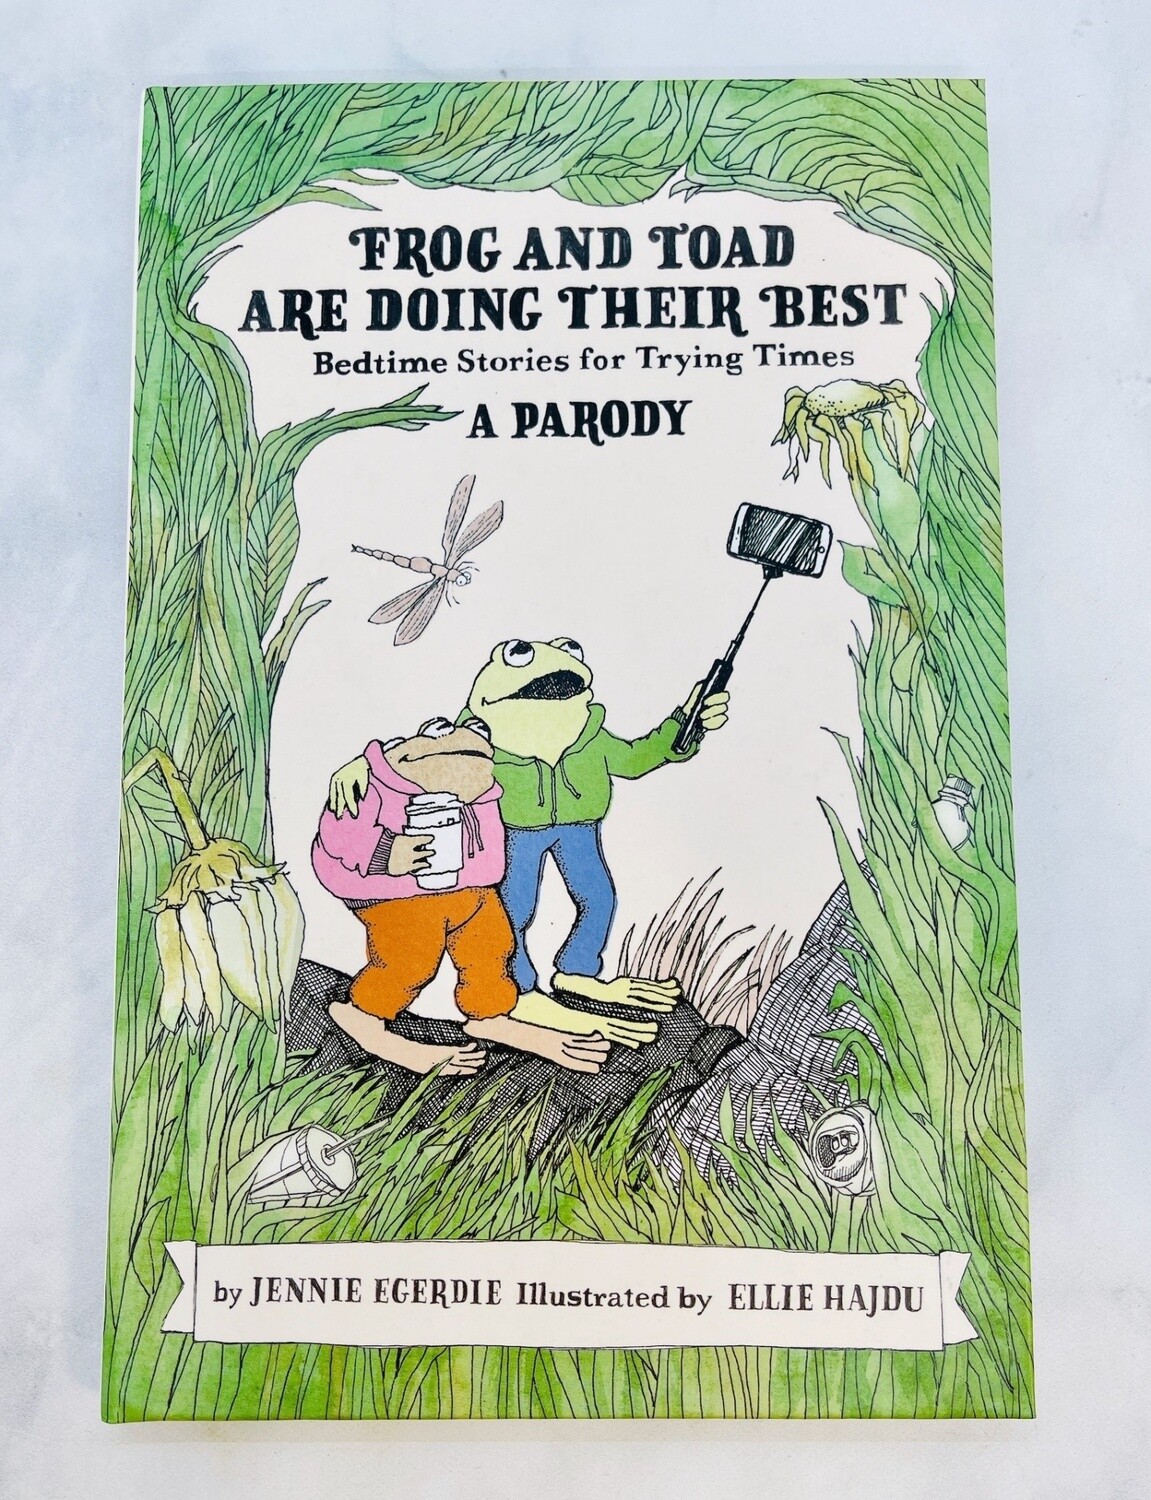 Frog and Toad are Doing Their Best